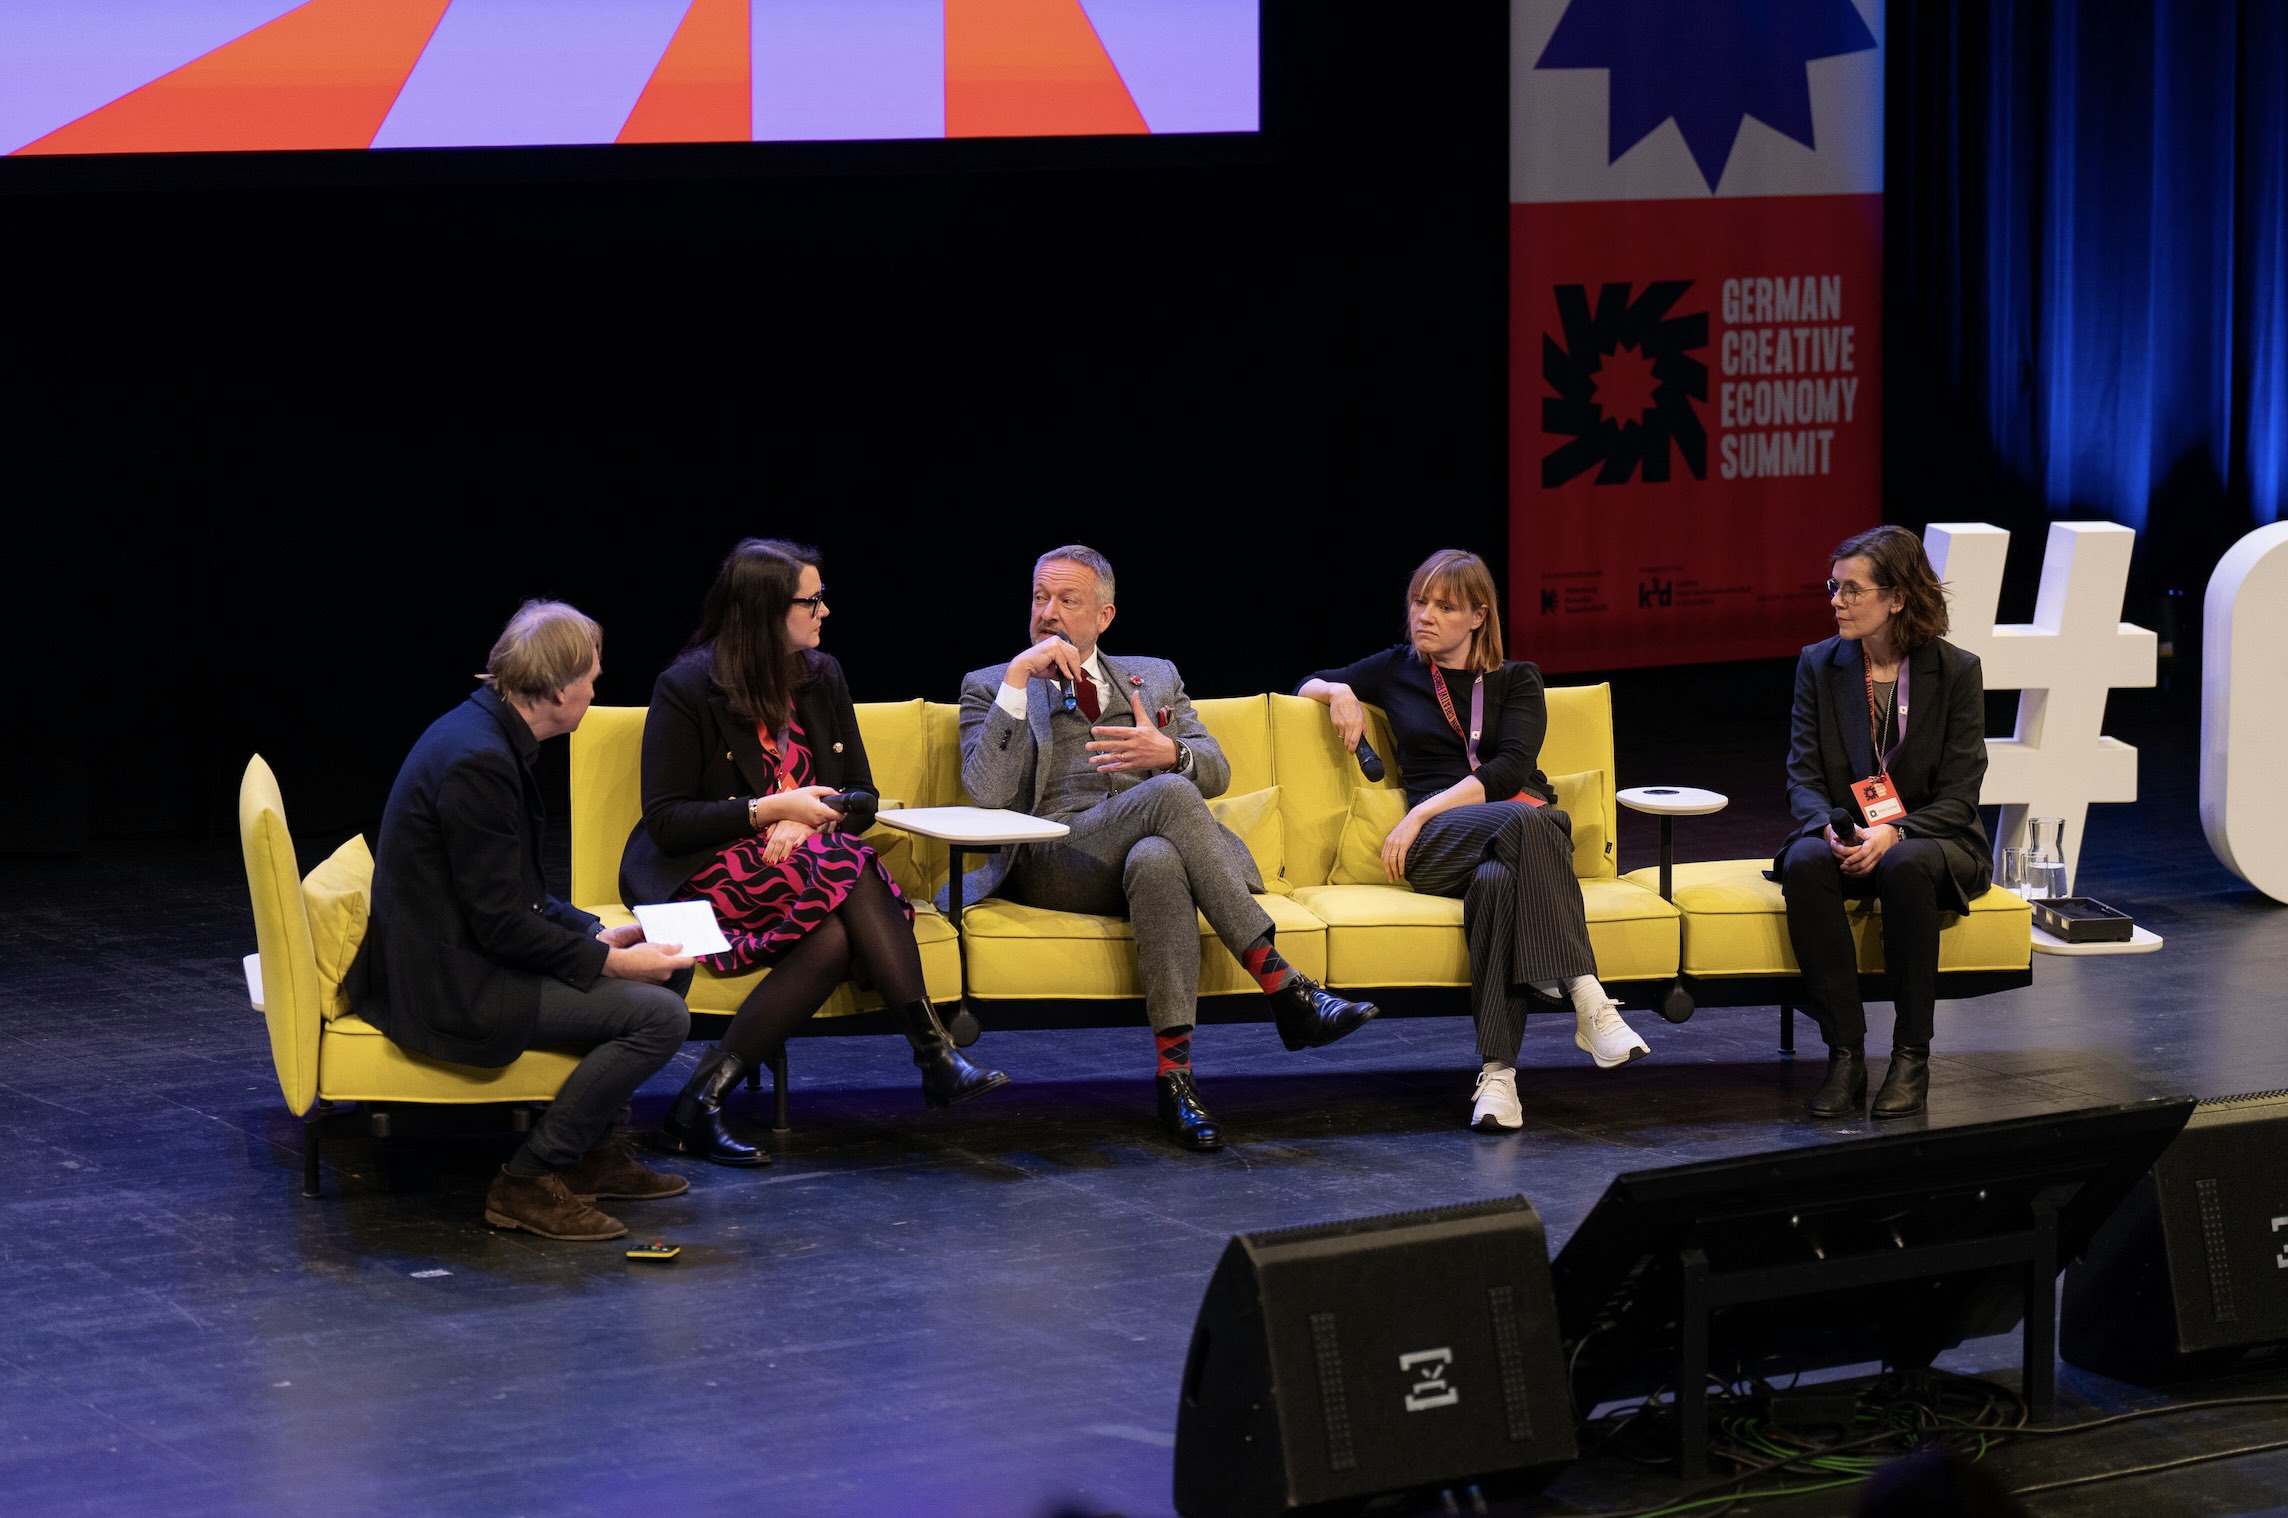 Peter Kraus vom Cleff, Reiner Nagel, Karin Loosen, Florian Reiff and Theresa Schleicher discussed the topic of city centres of the future at the GCES